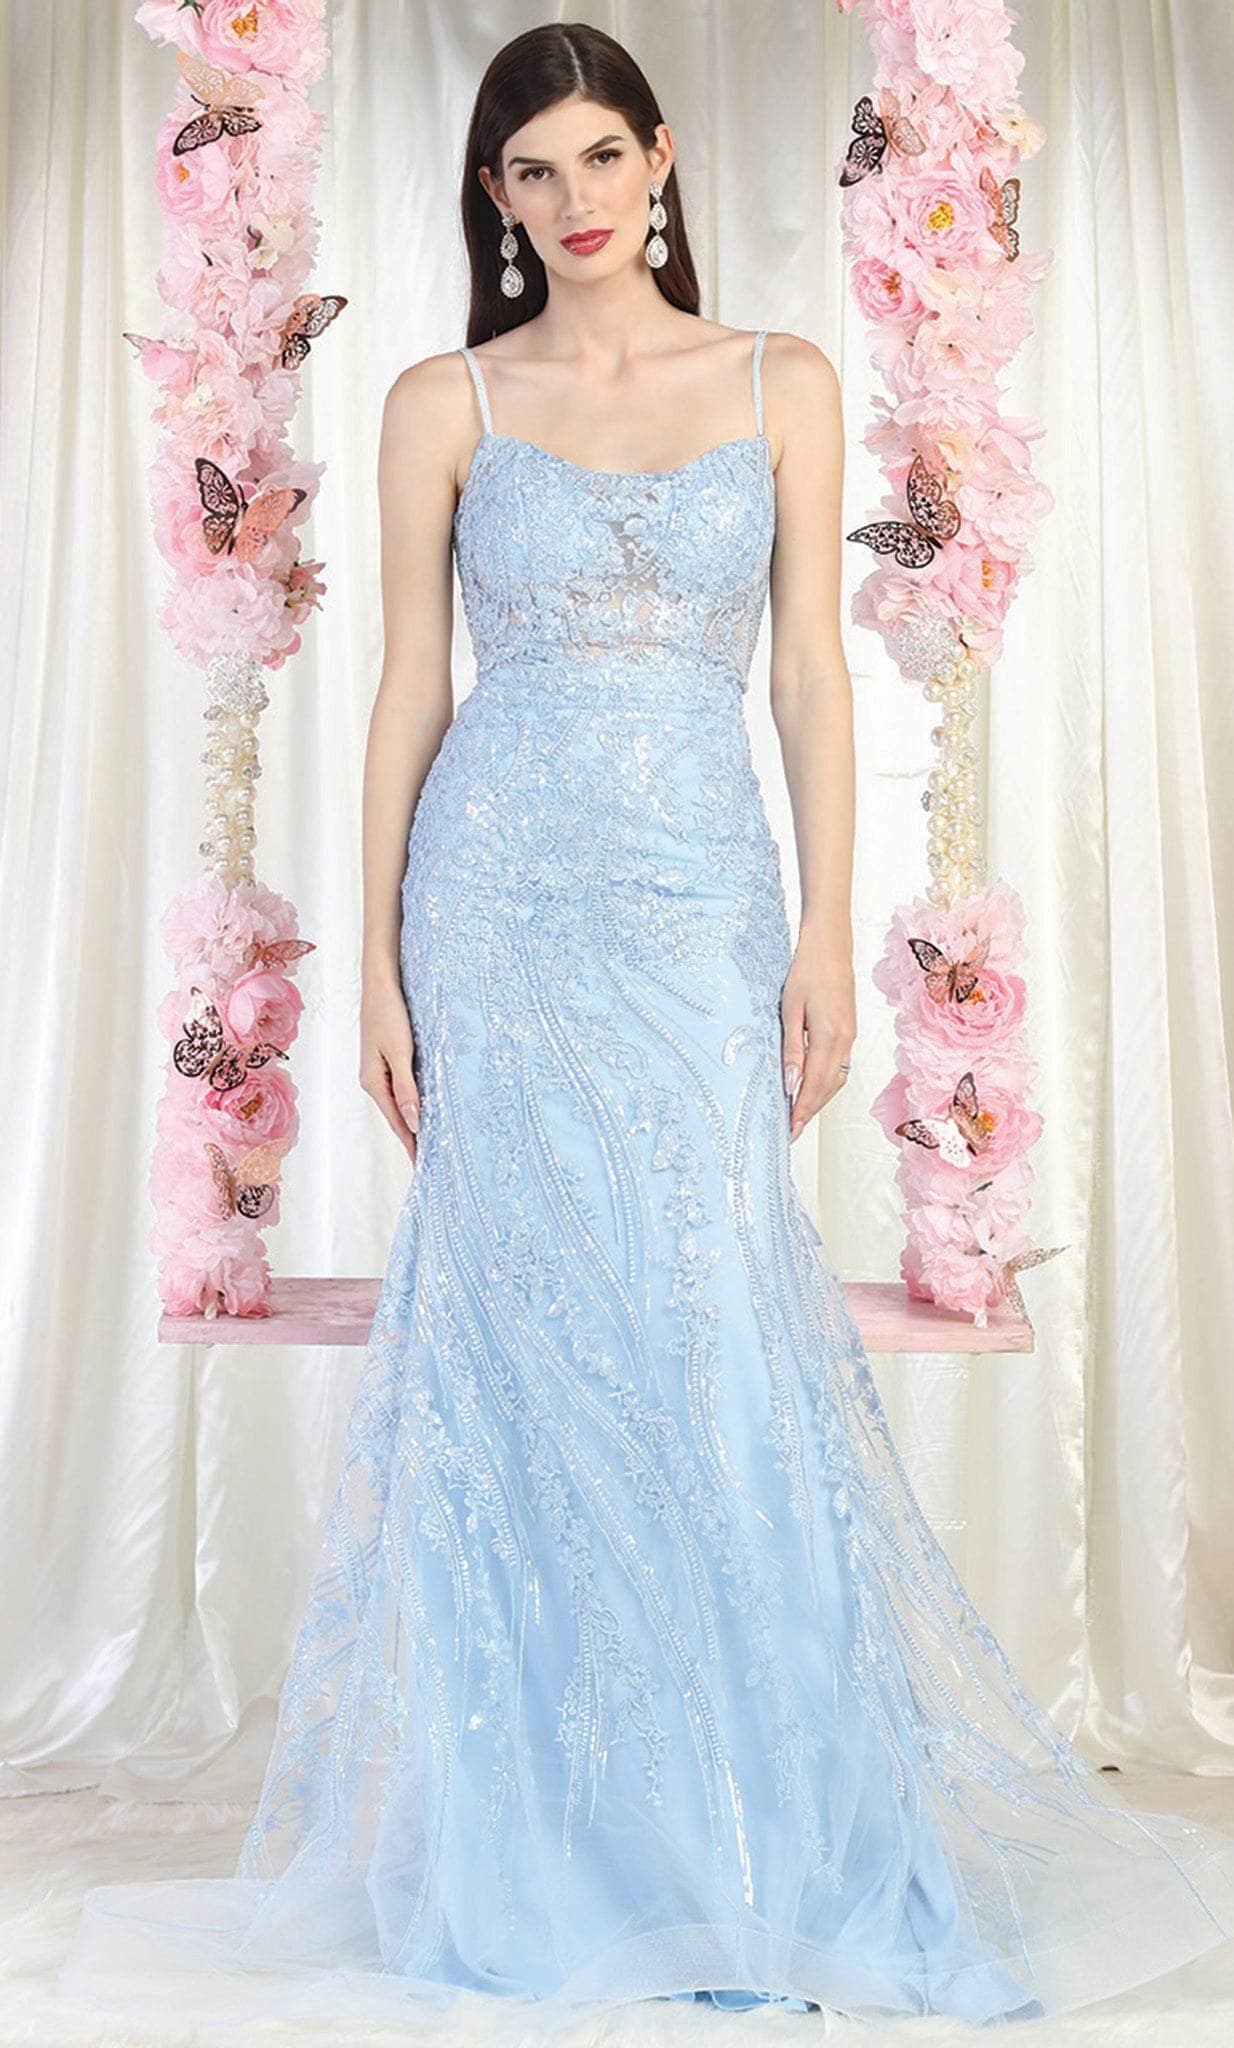 Image of May Queen RQ7974 - Embroidered Strappy Train Gown